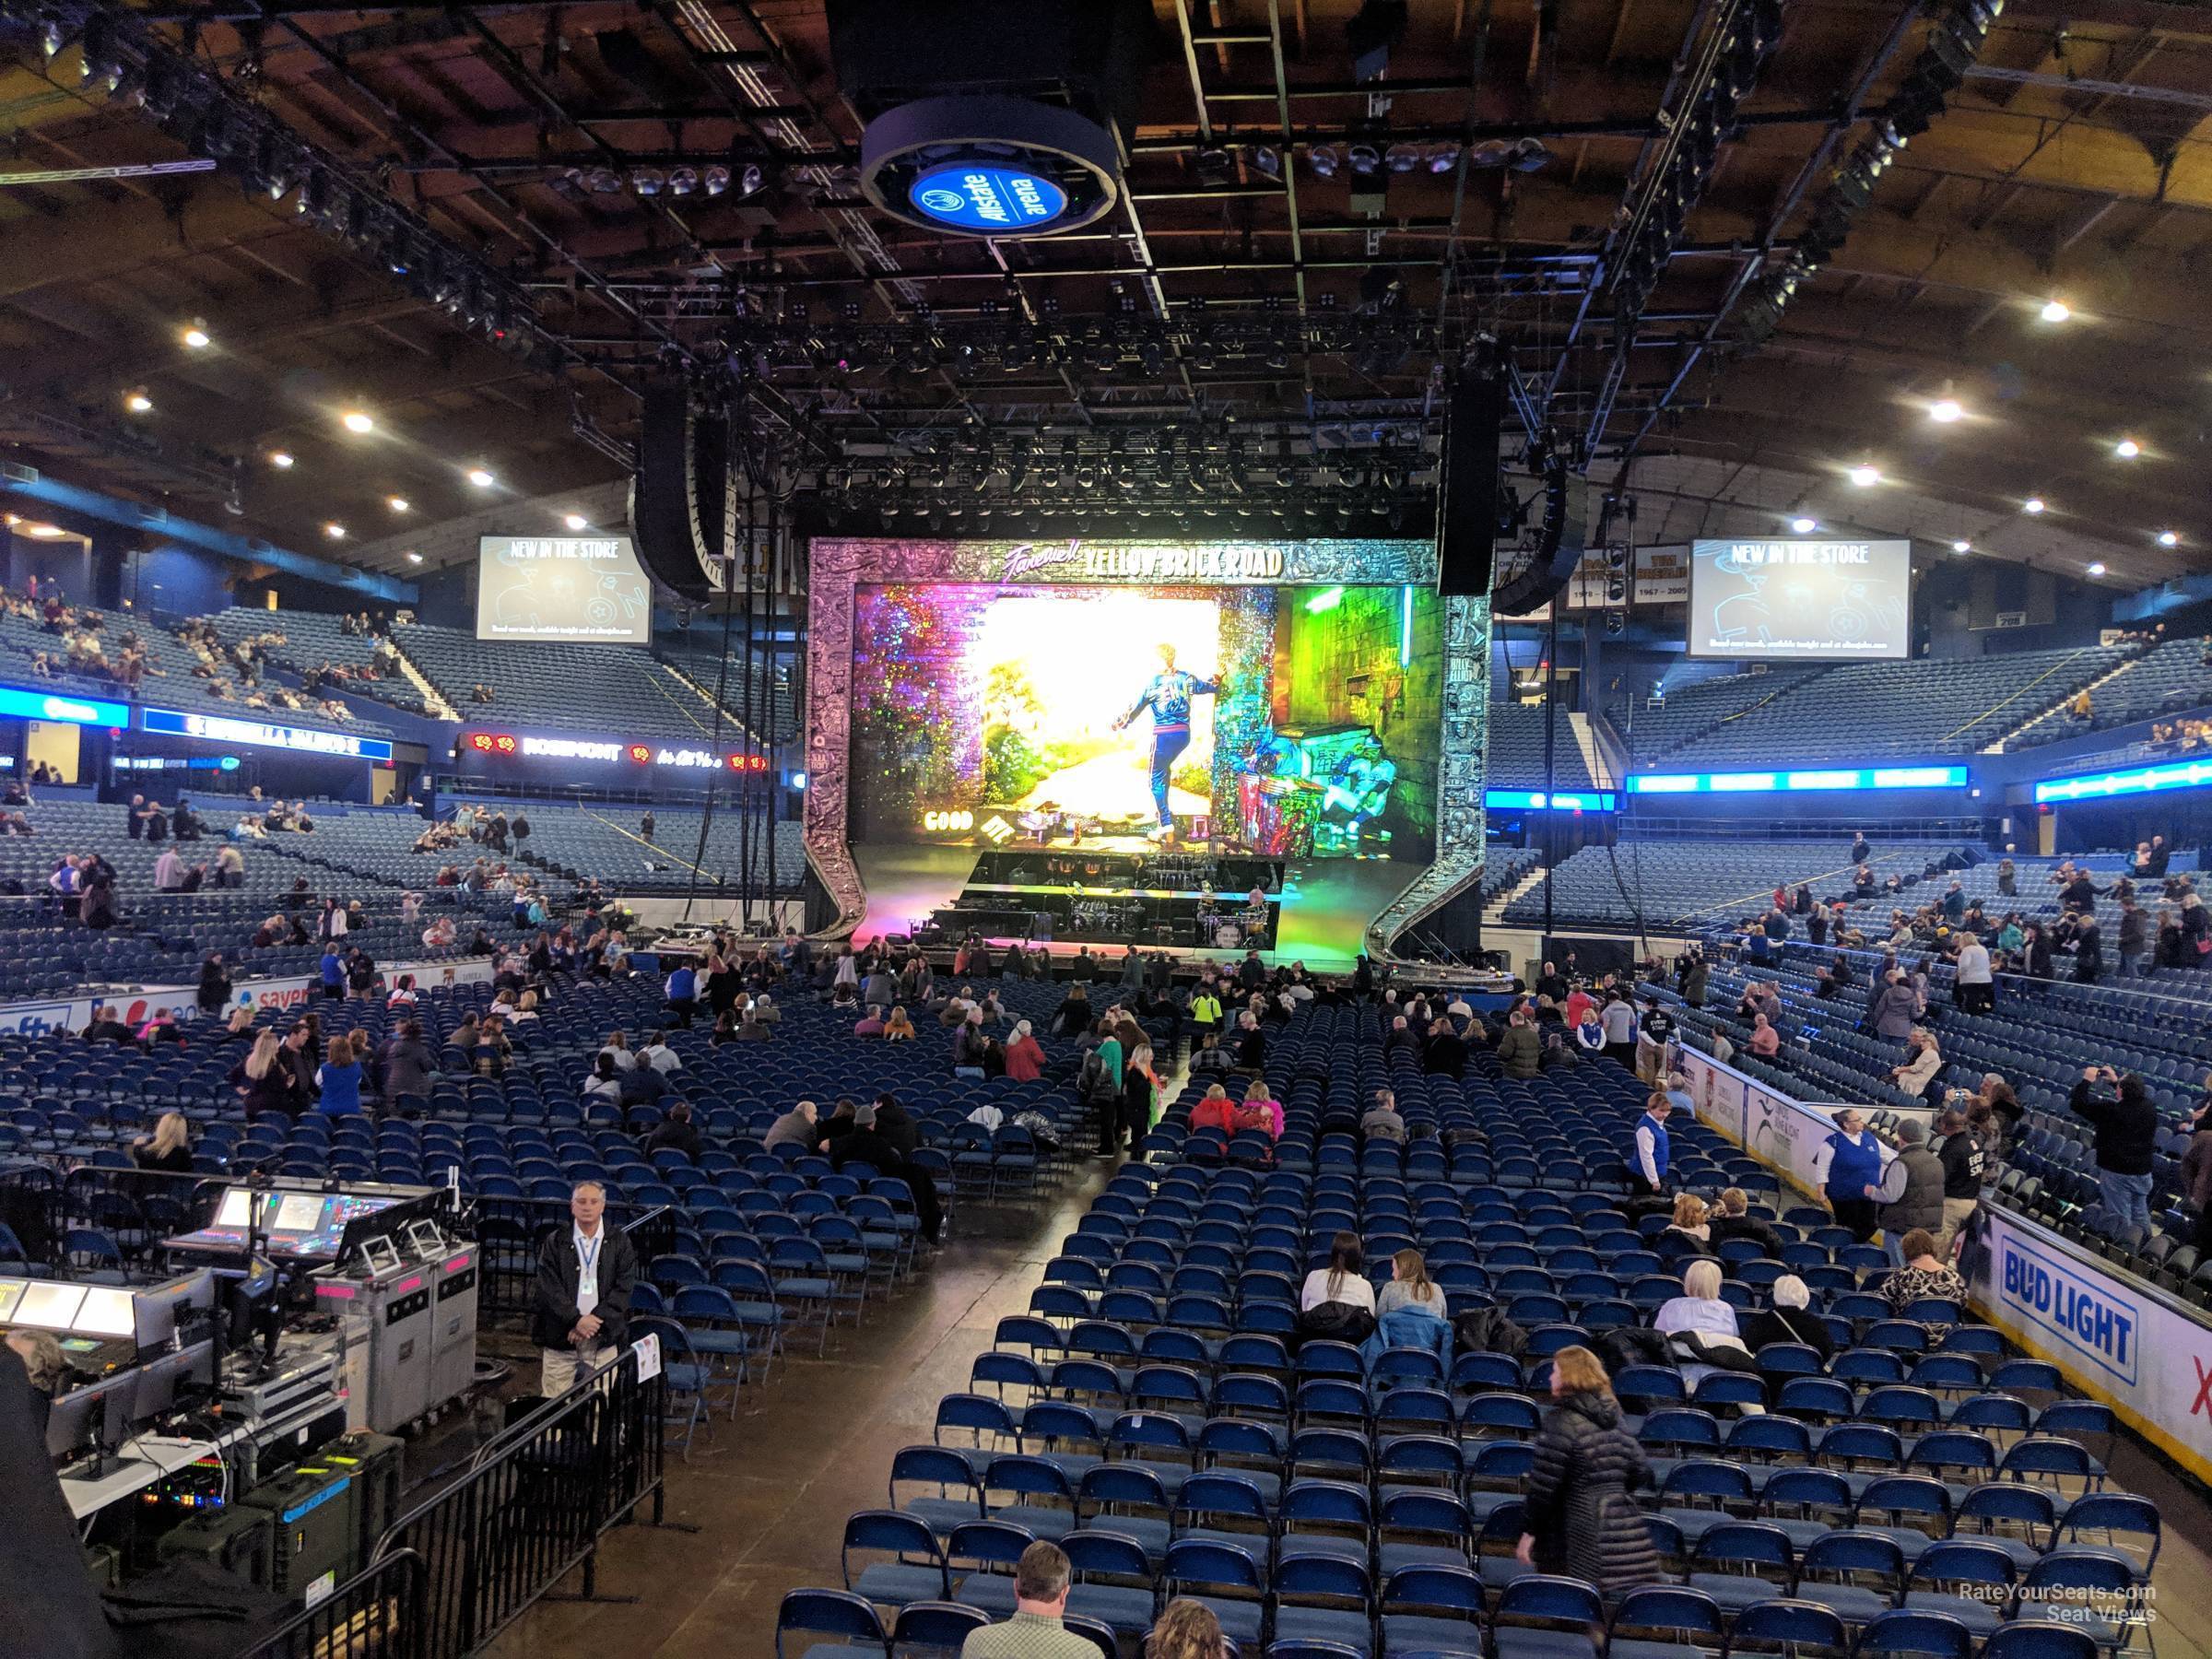 Section 114 at Allstate Arena for Concerts